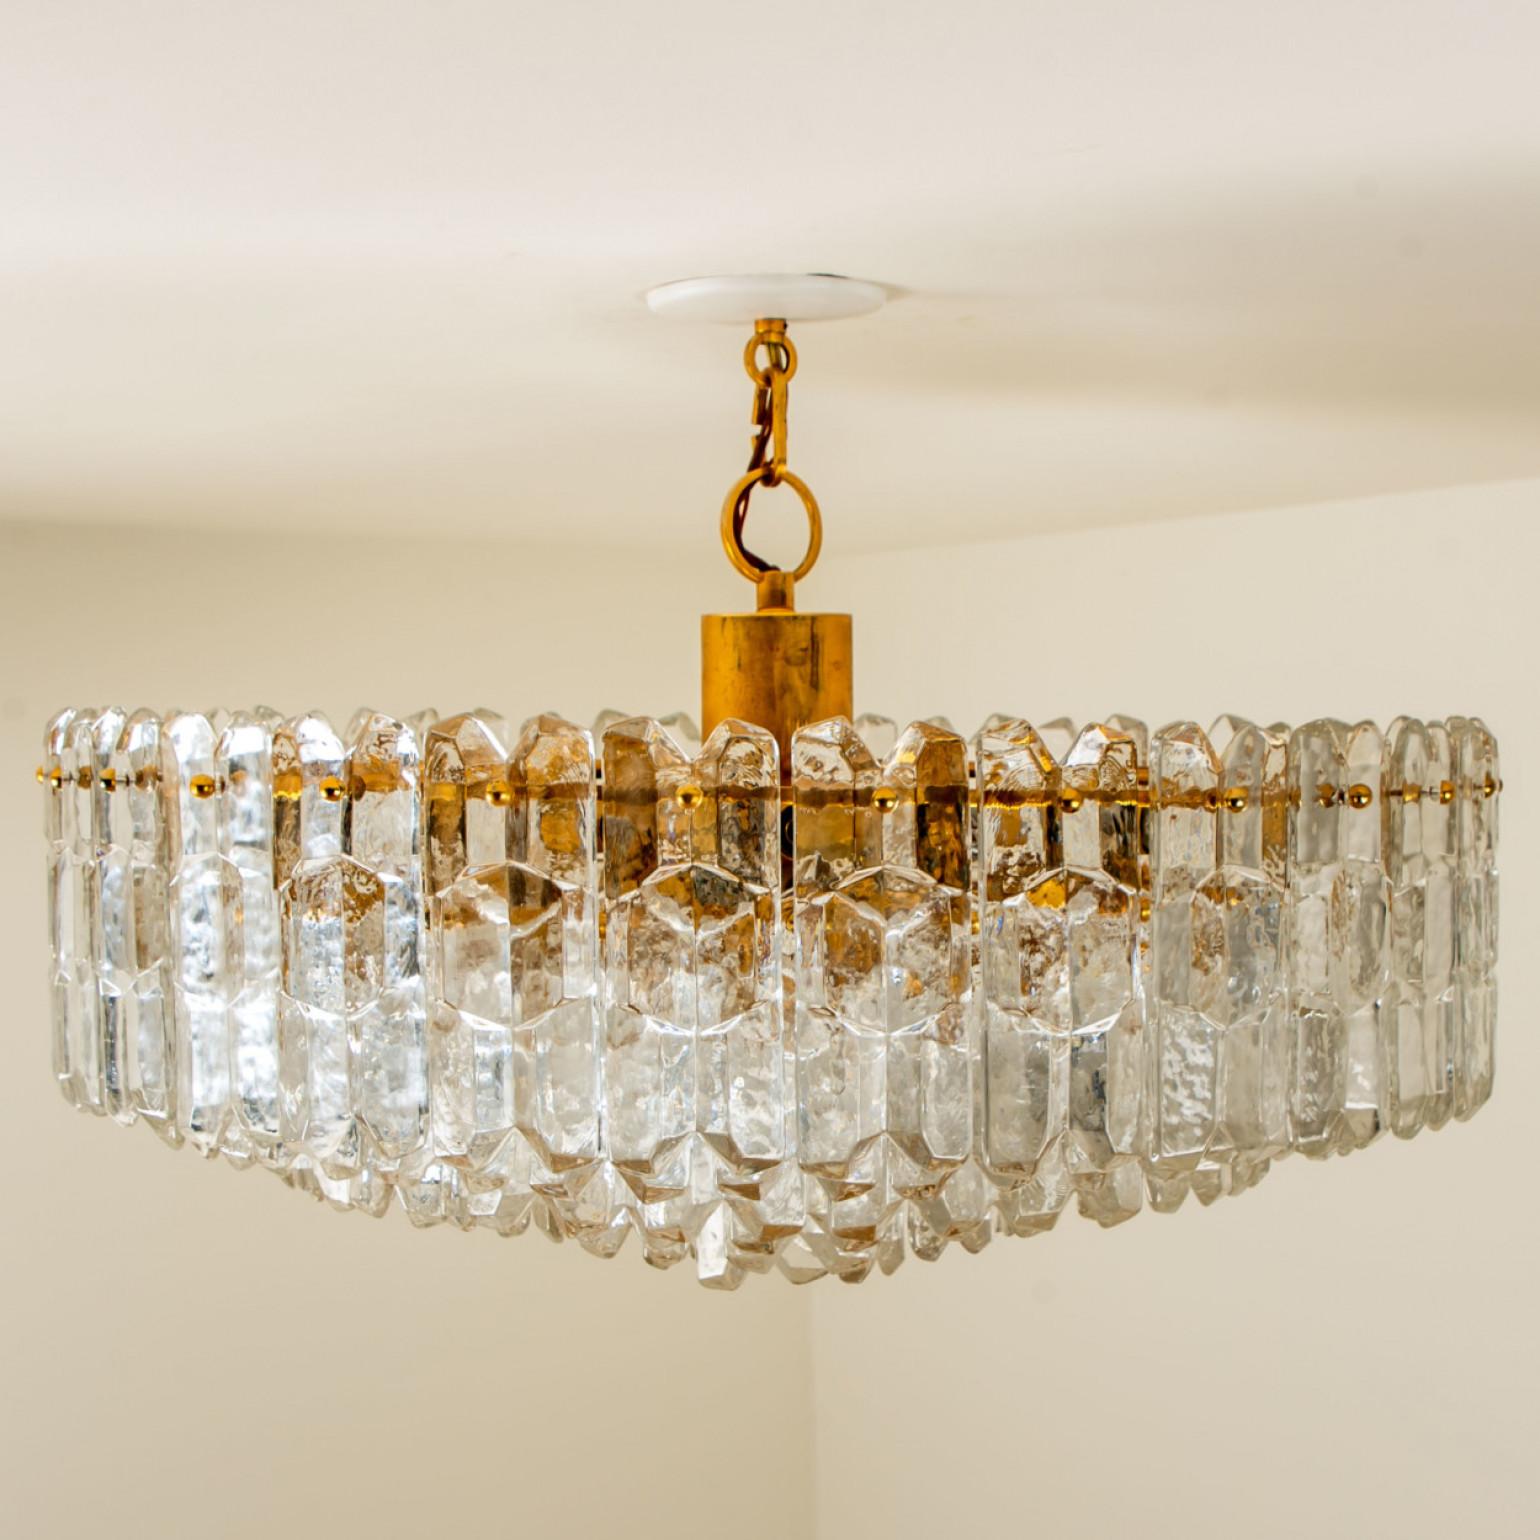 1 of the 2 Huge Kalmar Chandeliers 'Palazzo', Gilded Brass Glass, Austria, 1970s For Sale 8